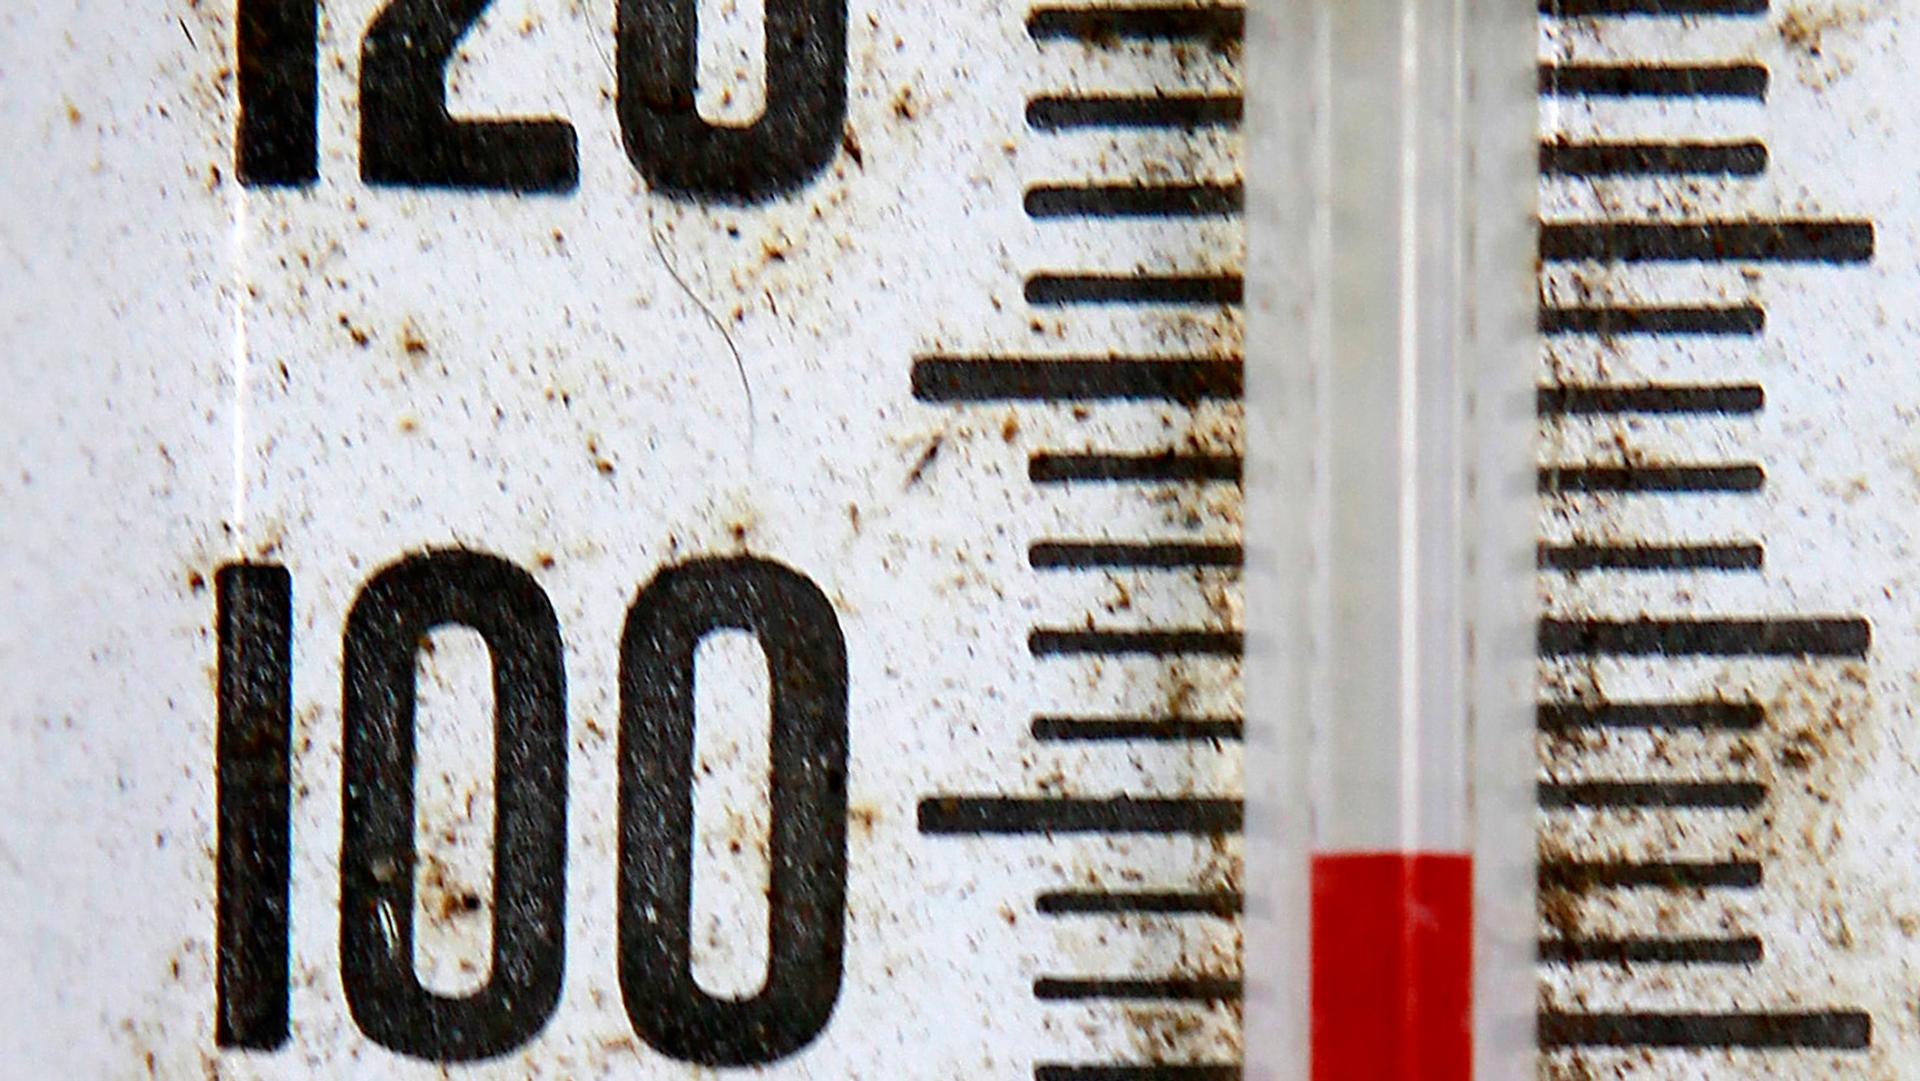 A thermometer records just below 100 degrees in a north Seattle neighborhood Wednesday afternoon, July 29, 2009. 